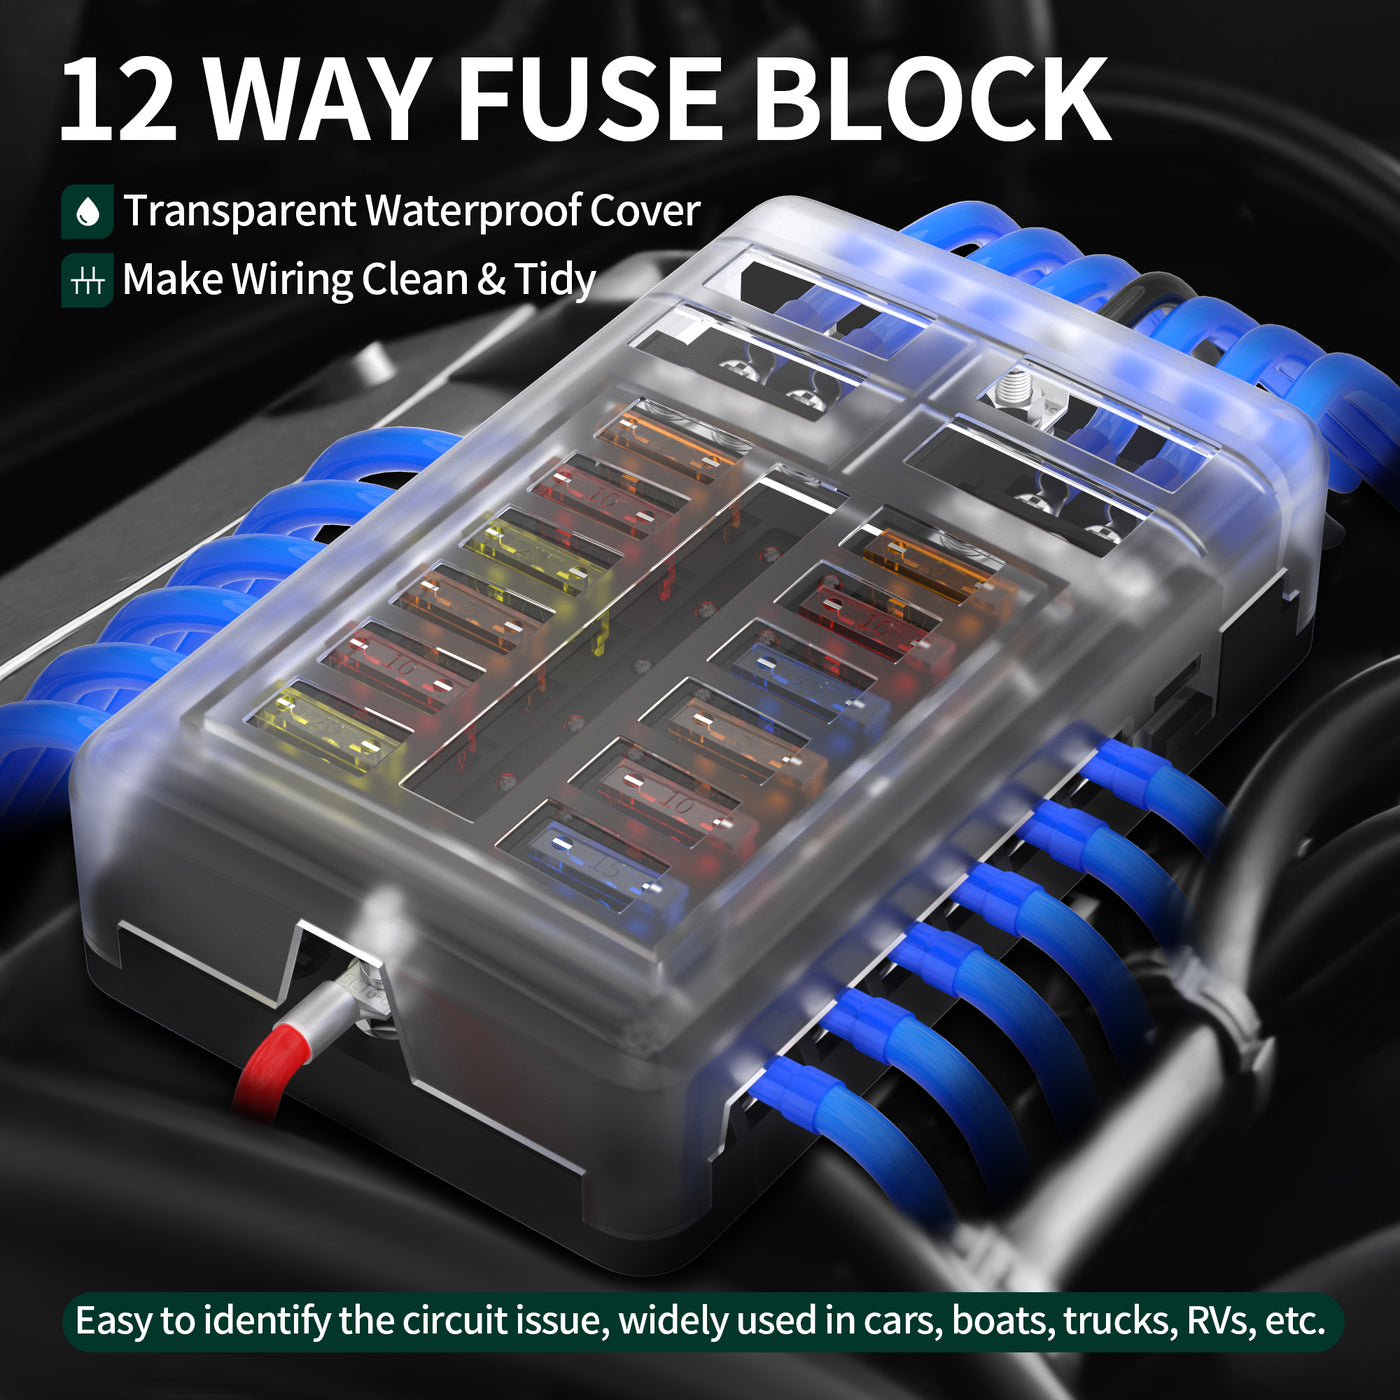 FB-1714 12-Way Blade Fuse Block with Waterproof Cover